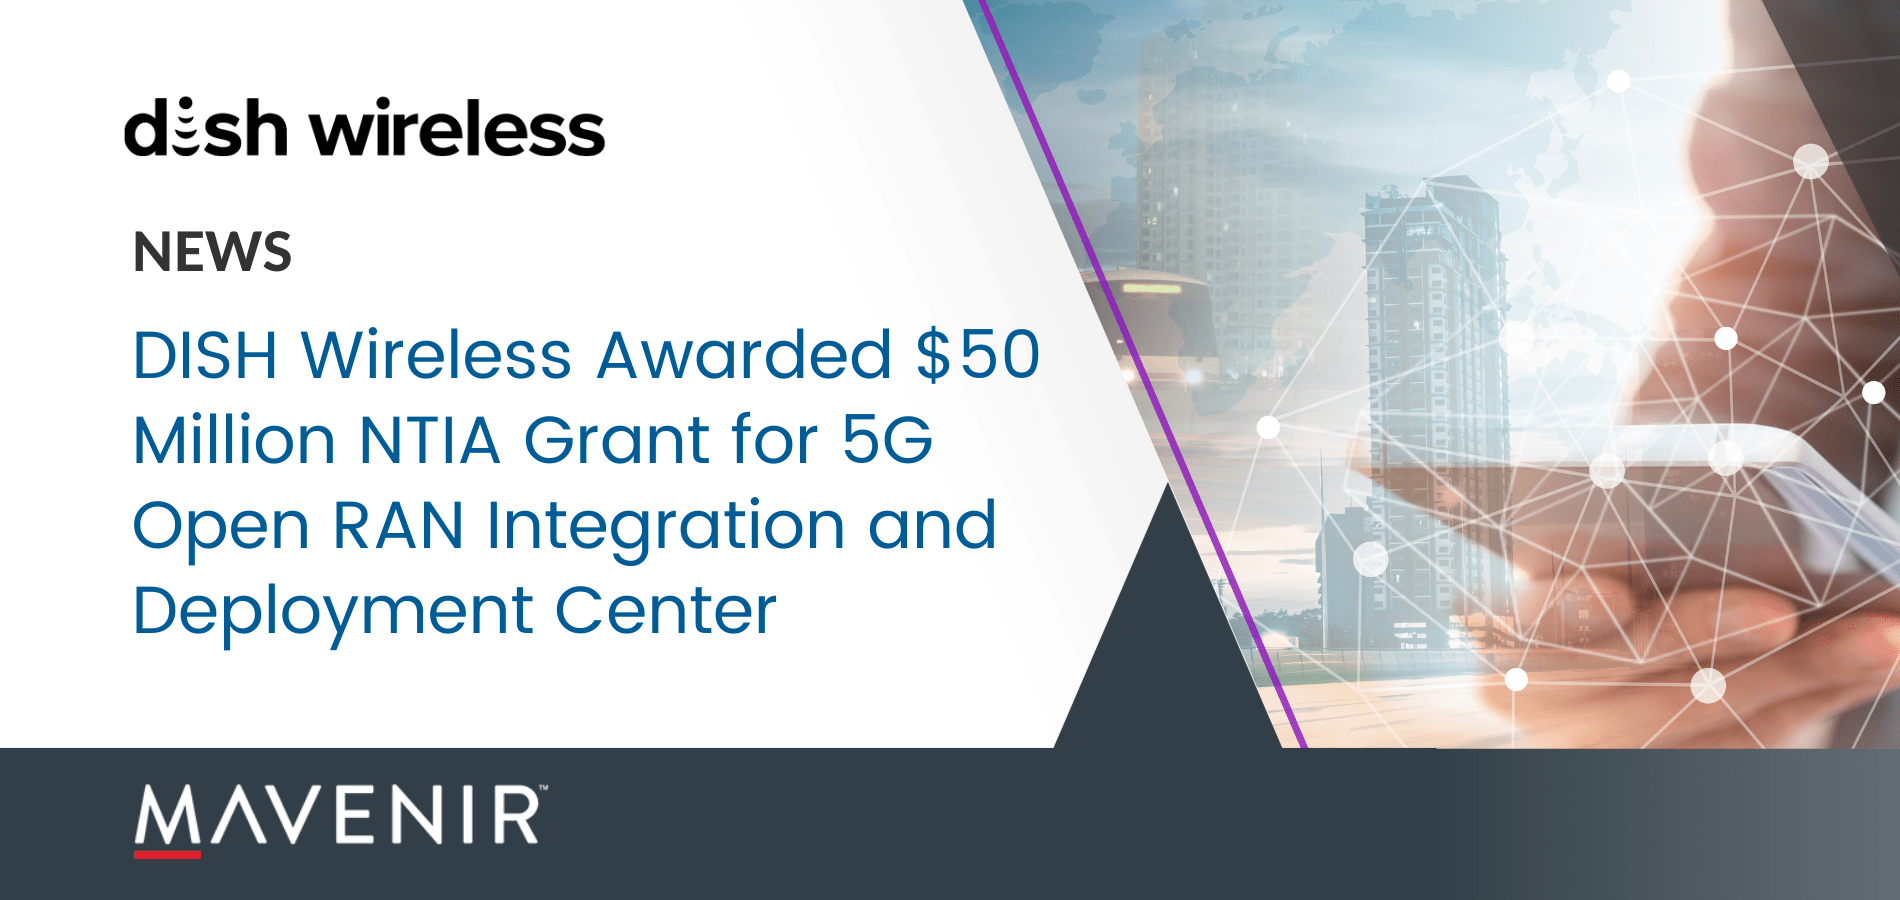 DISH Wireless Awarded $50 Million NTIA Grant for 5G Open RAN Integration and Deployment Center